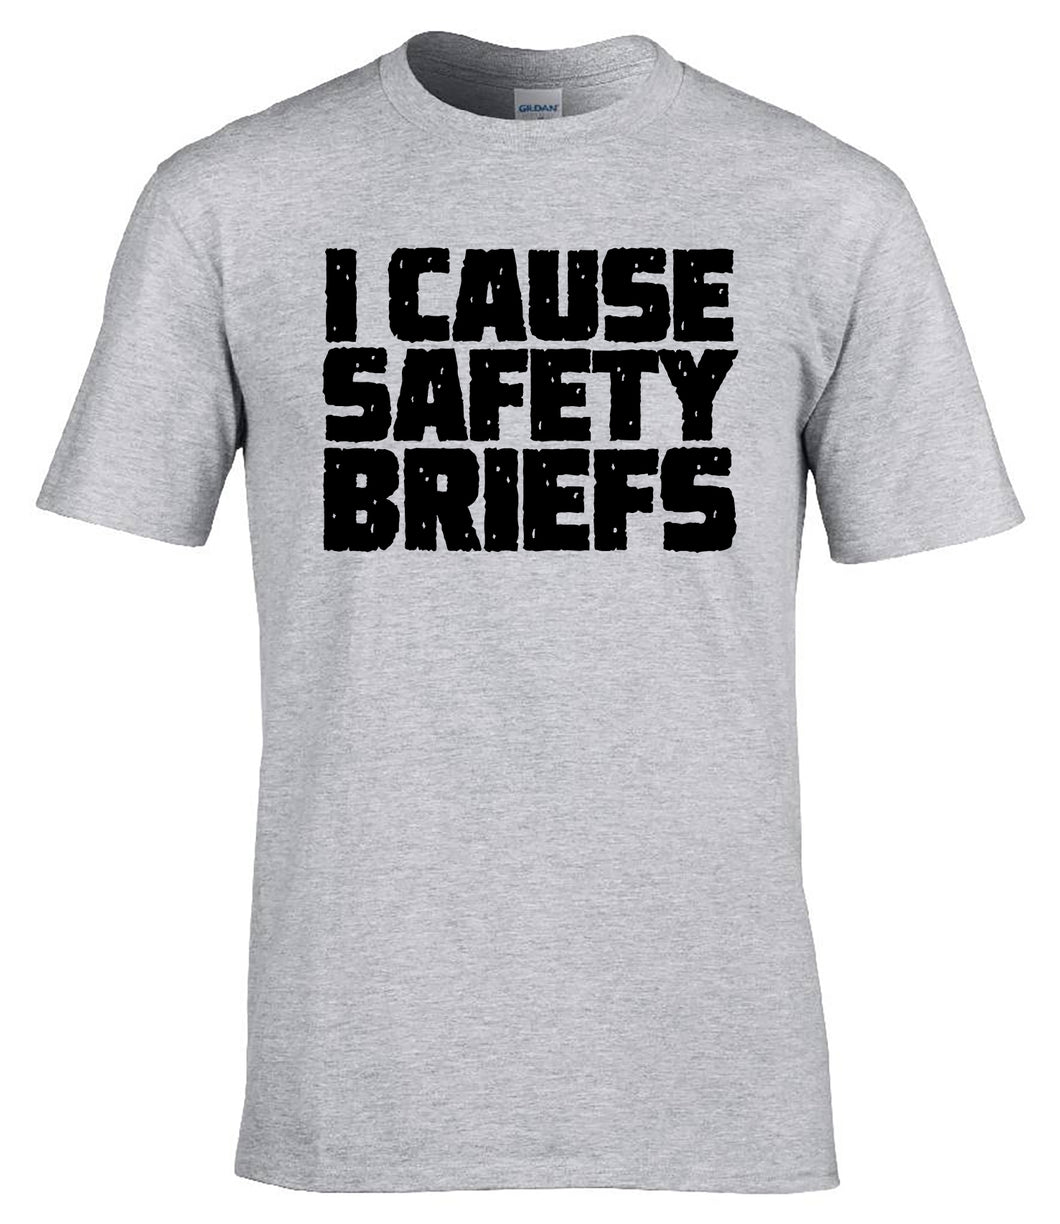 Military Humor - I Cause Safety Briefs